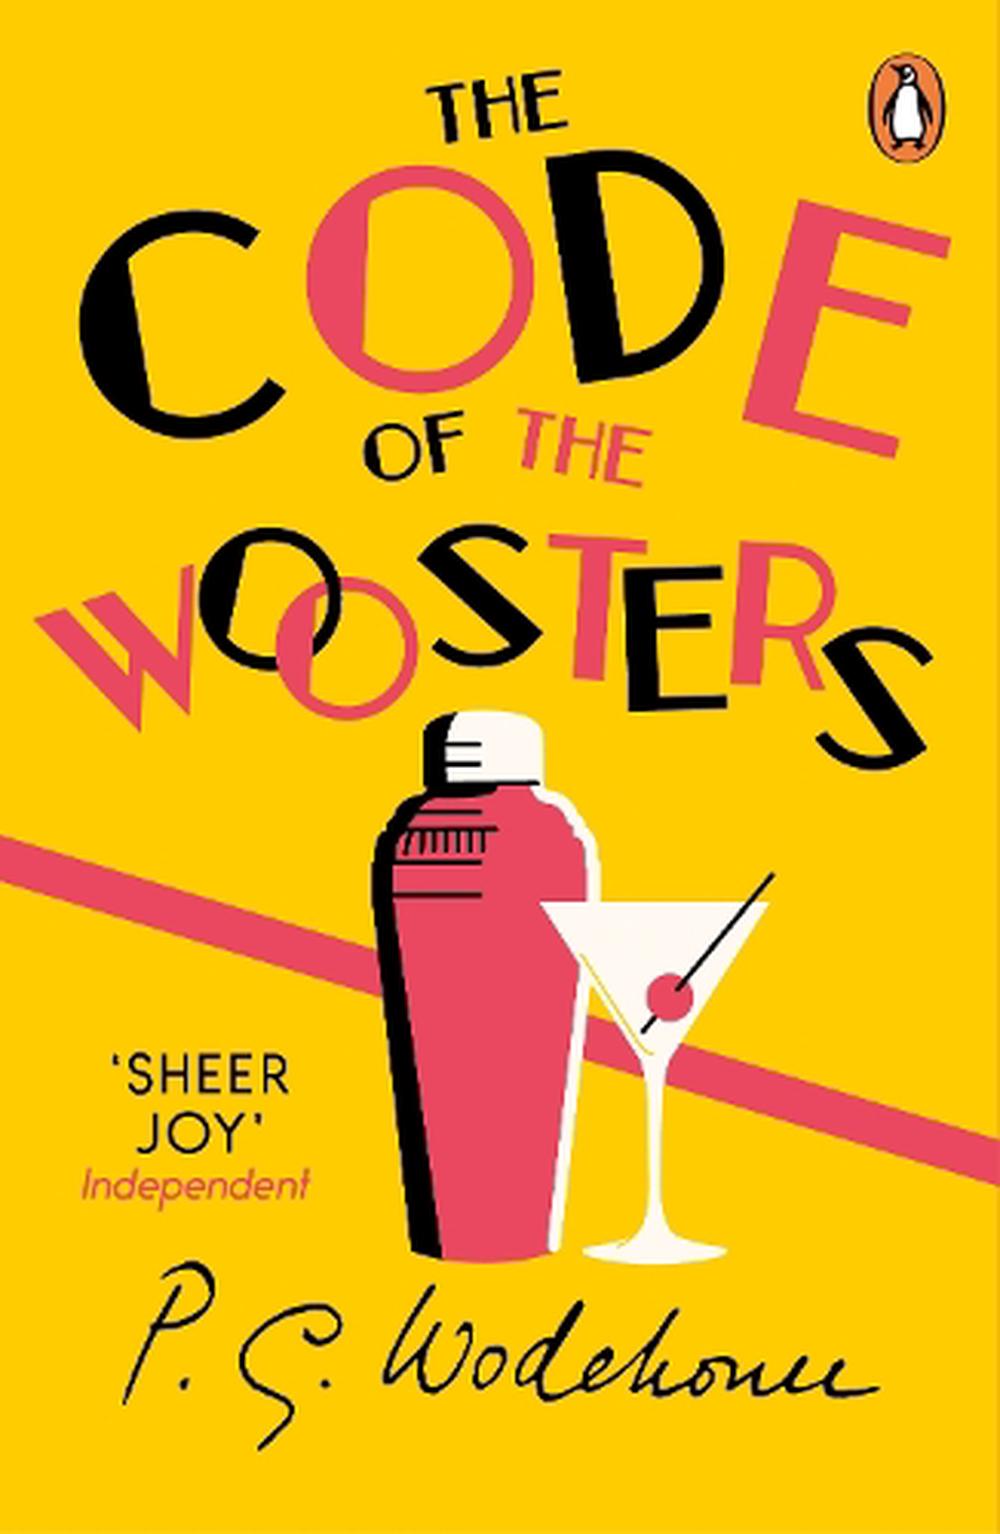 wodehouse code of the woosters